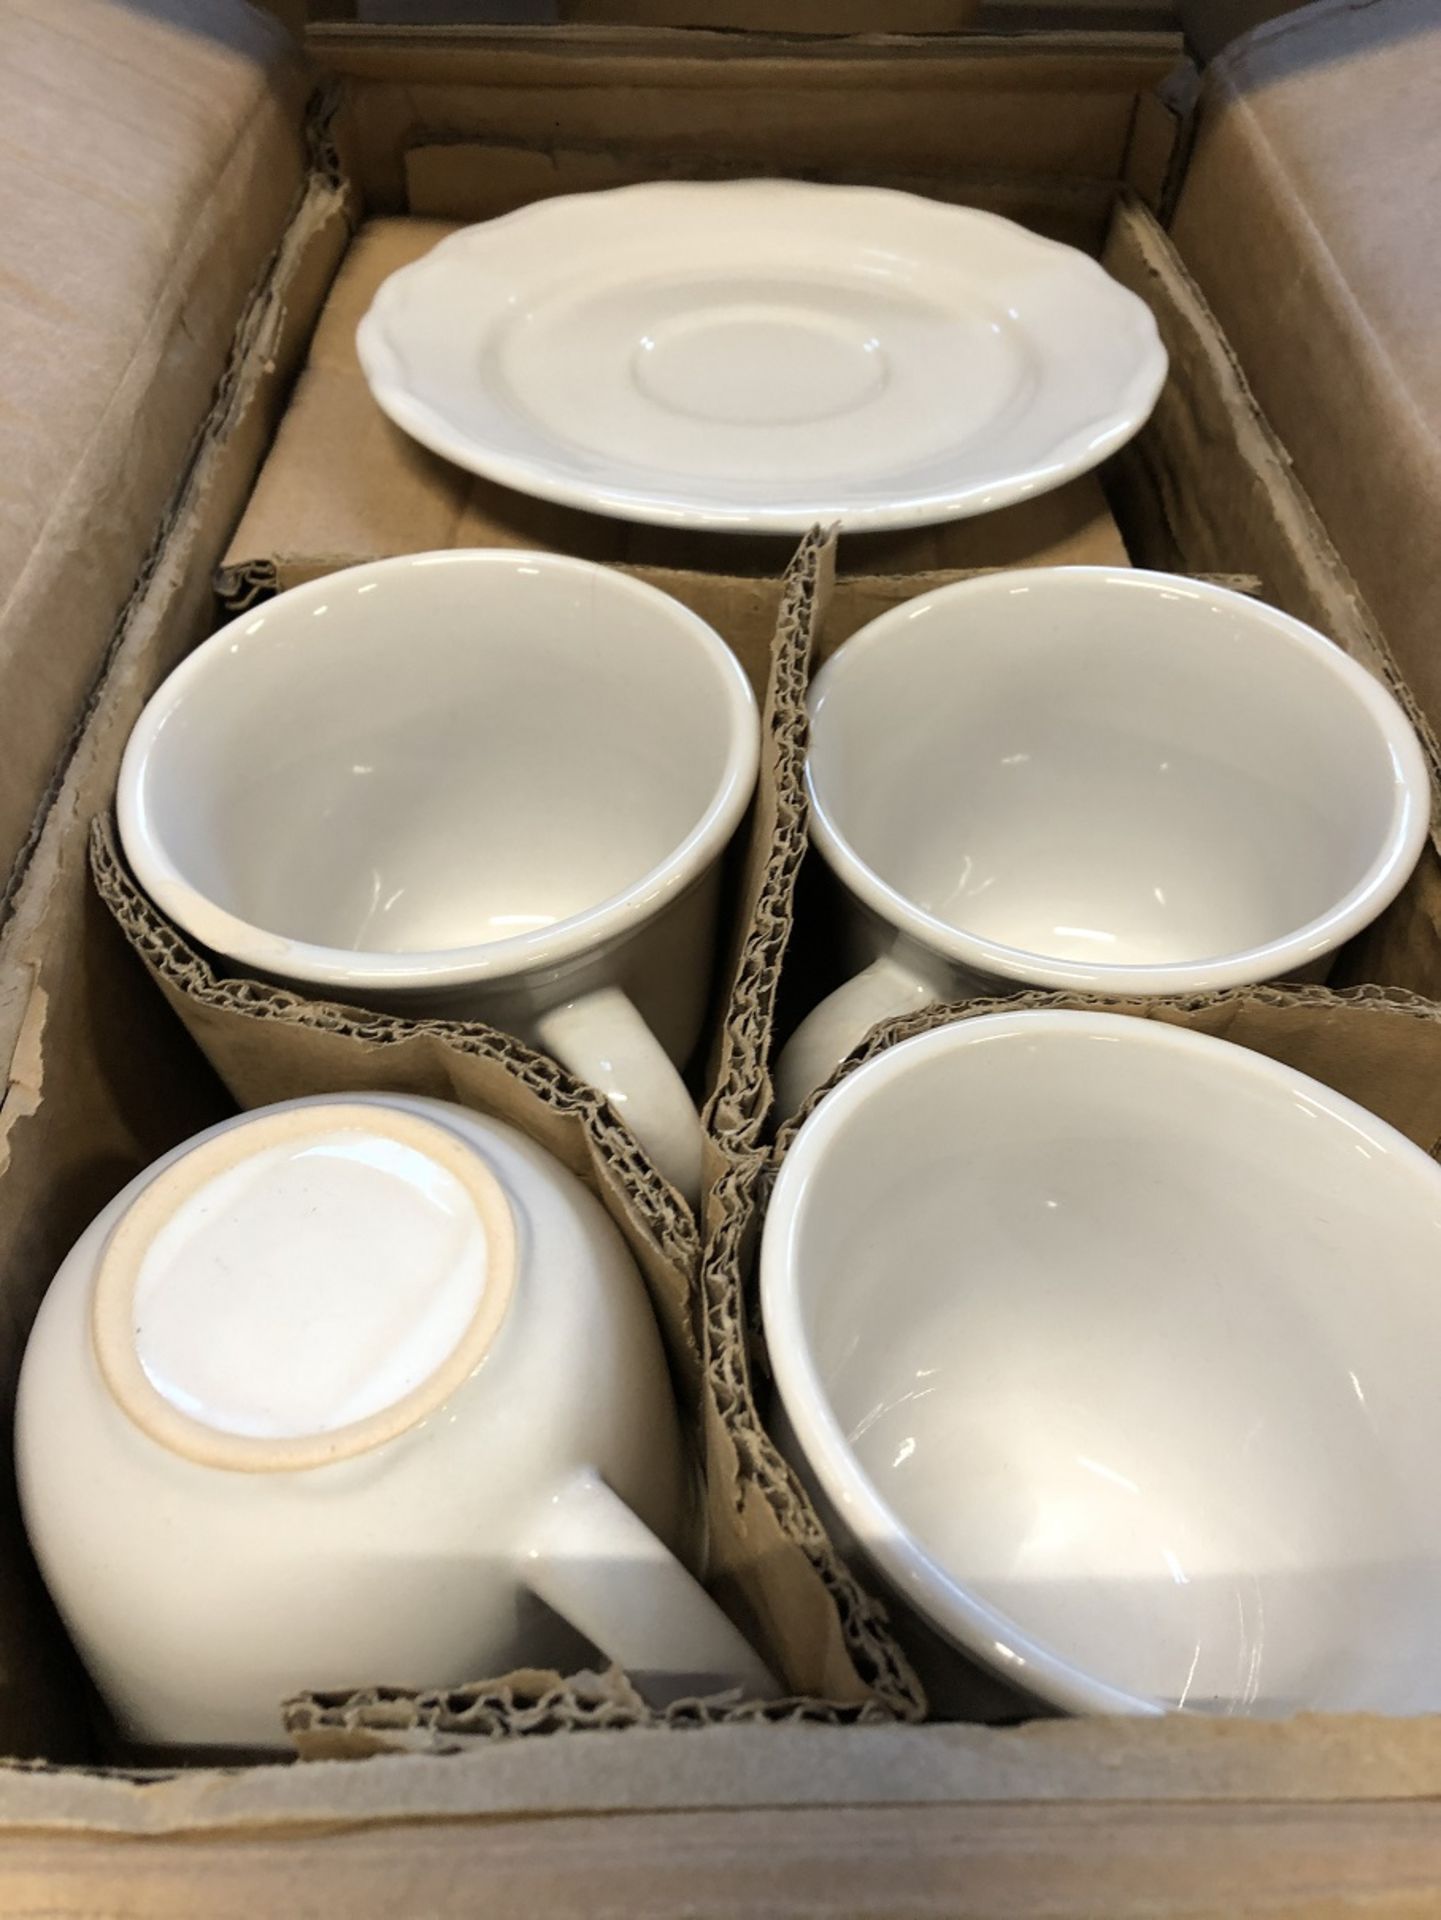 SET OF 4 CUPS AND SAUCERS SOURCED FROM LA REDOUTE (IMAGES ARE FOR ILLUSTRATION PURPOSES ONLY - WE DO